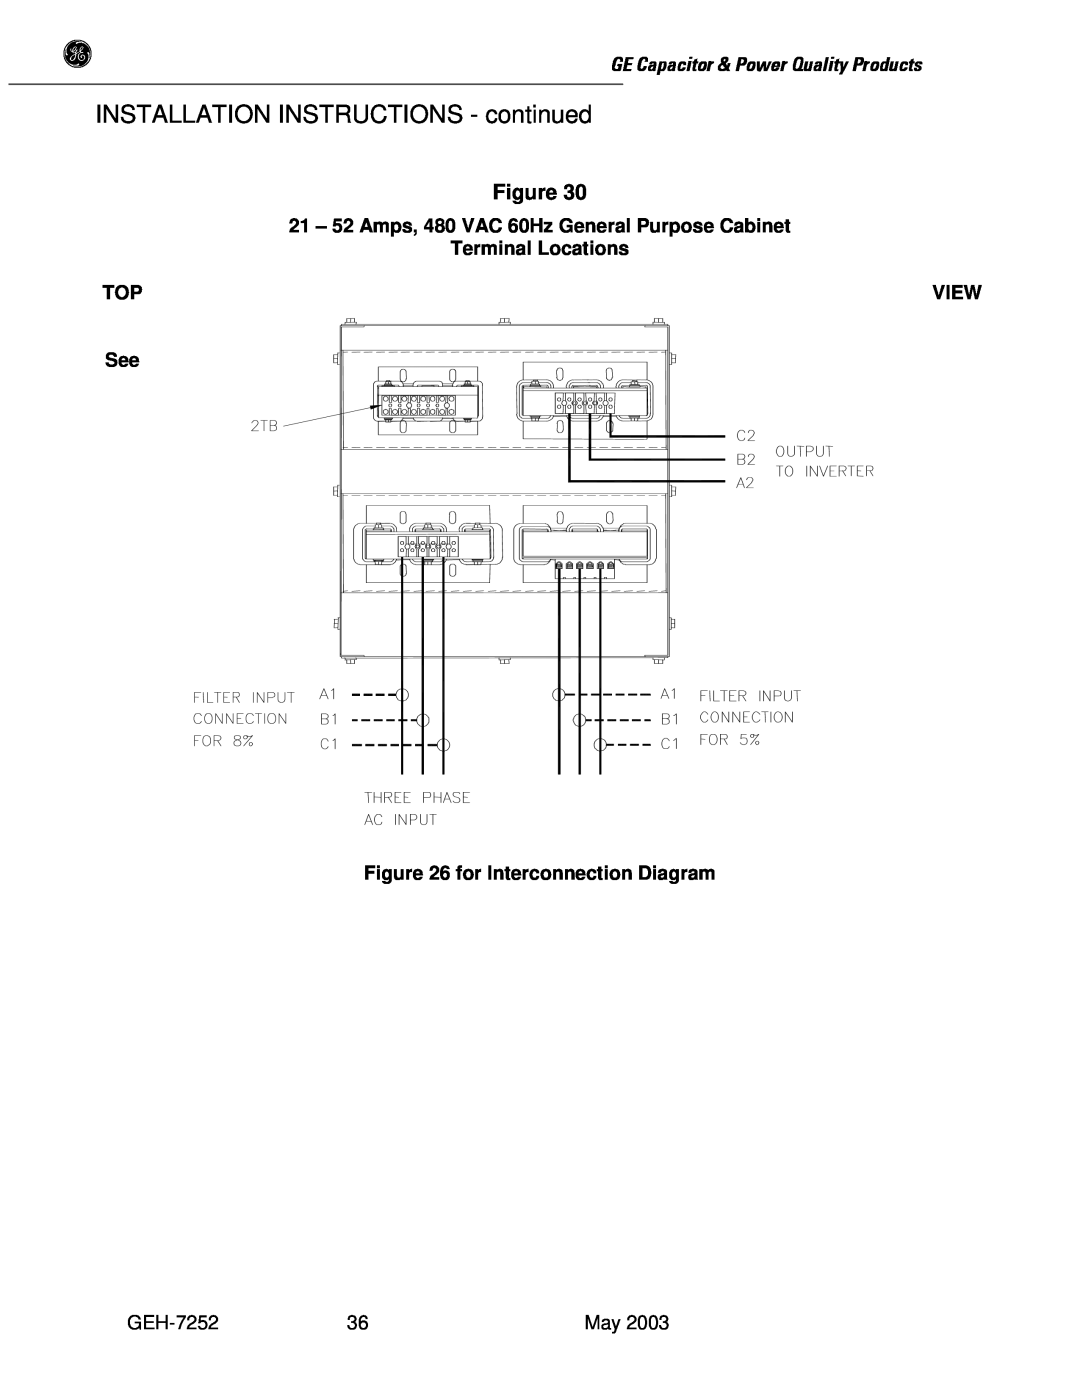 GE SERIES B 480 INSTALLATION INSTRUCTIONS - continued, Terminal Locations, View, See for Interconnection Diagram 